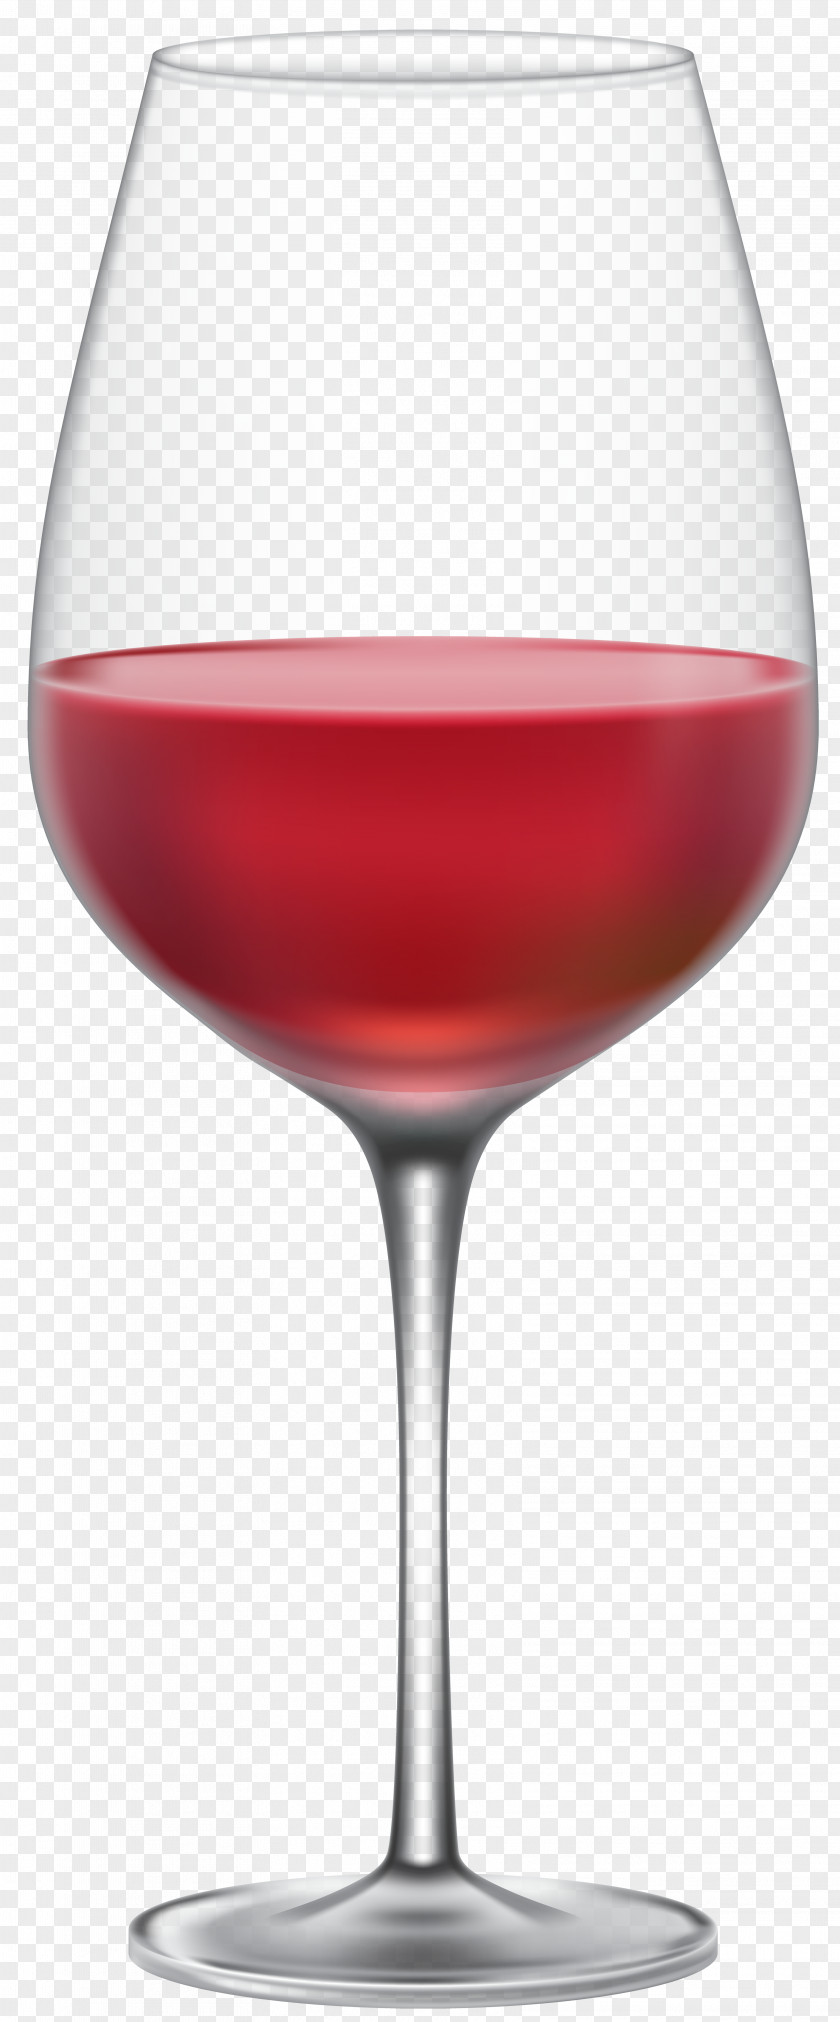 Glass Of White Wine Transparent Clip Art Image Red PNG